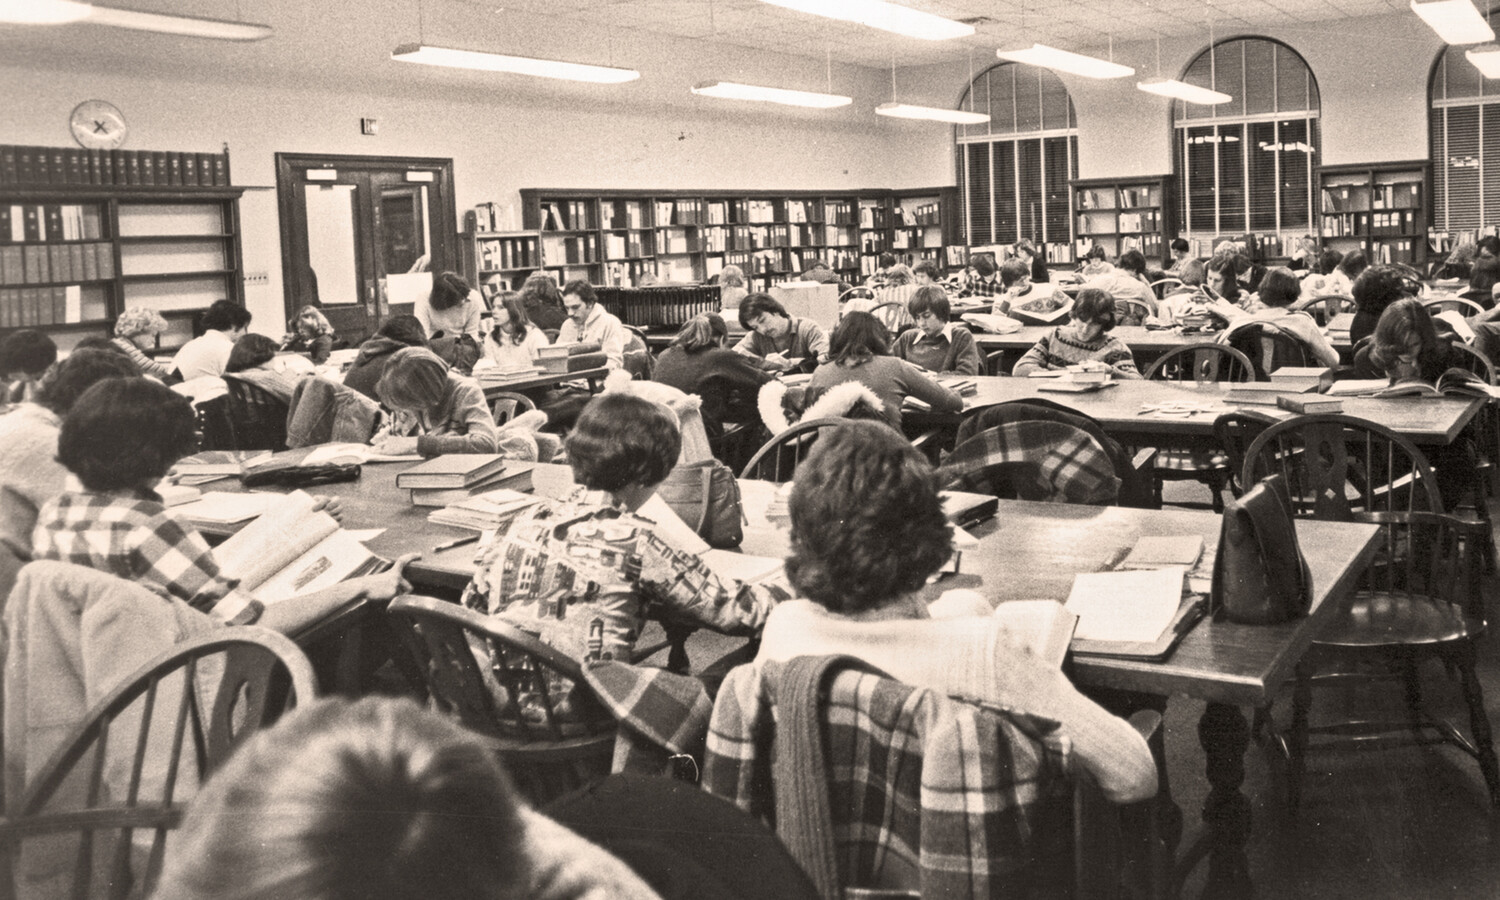 1978, A crowed Madison Memorial Library before addition was built, James Madison University